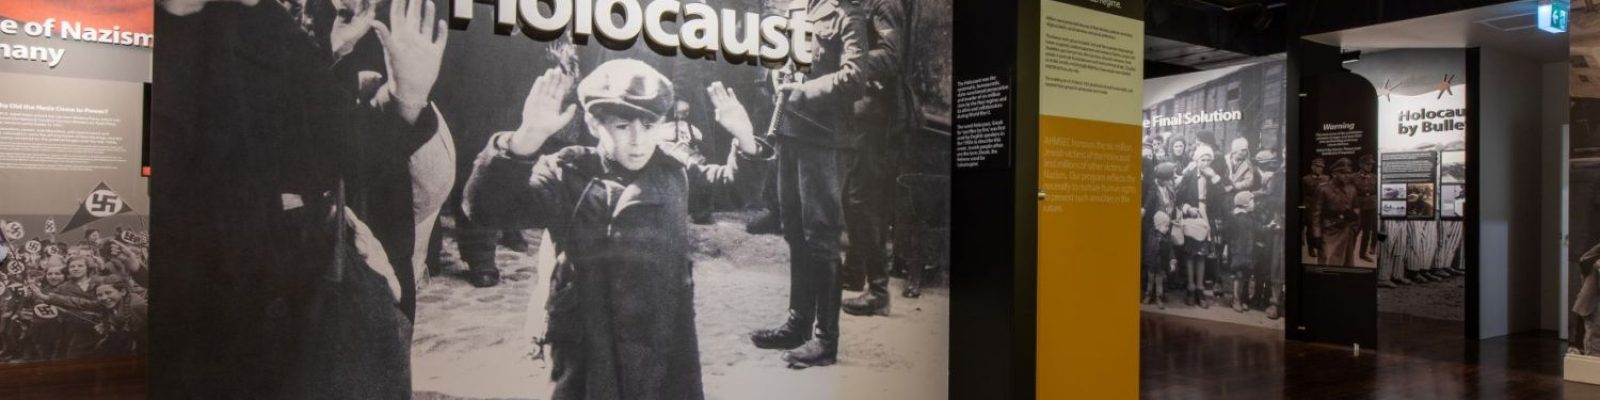 Large image of a young boy with hands raised under a sign reading 'The Holocaust'